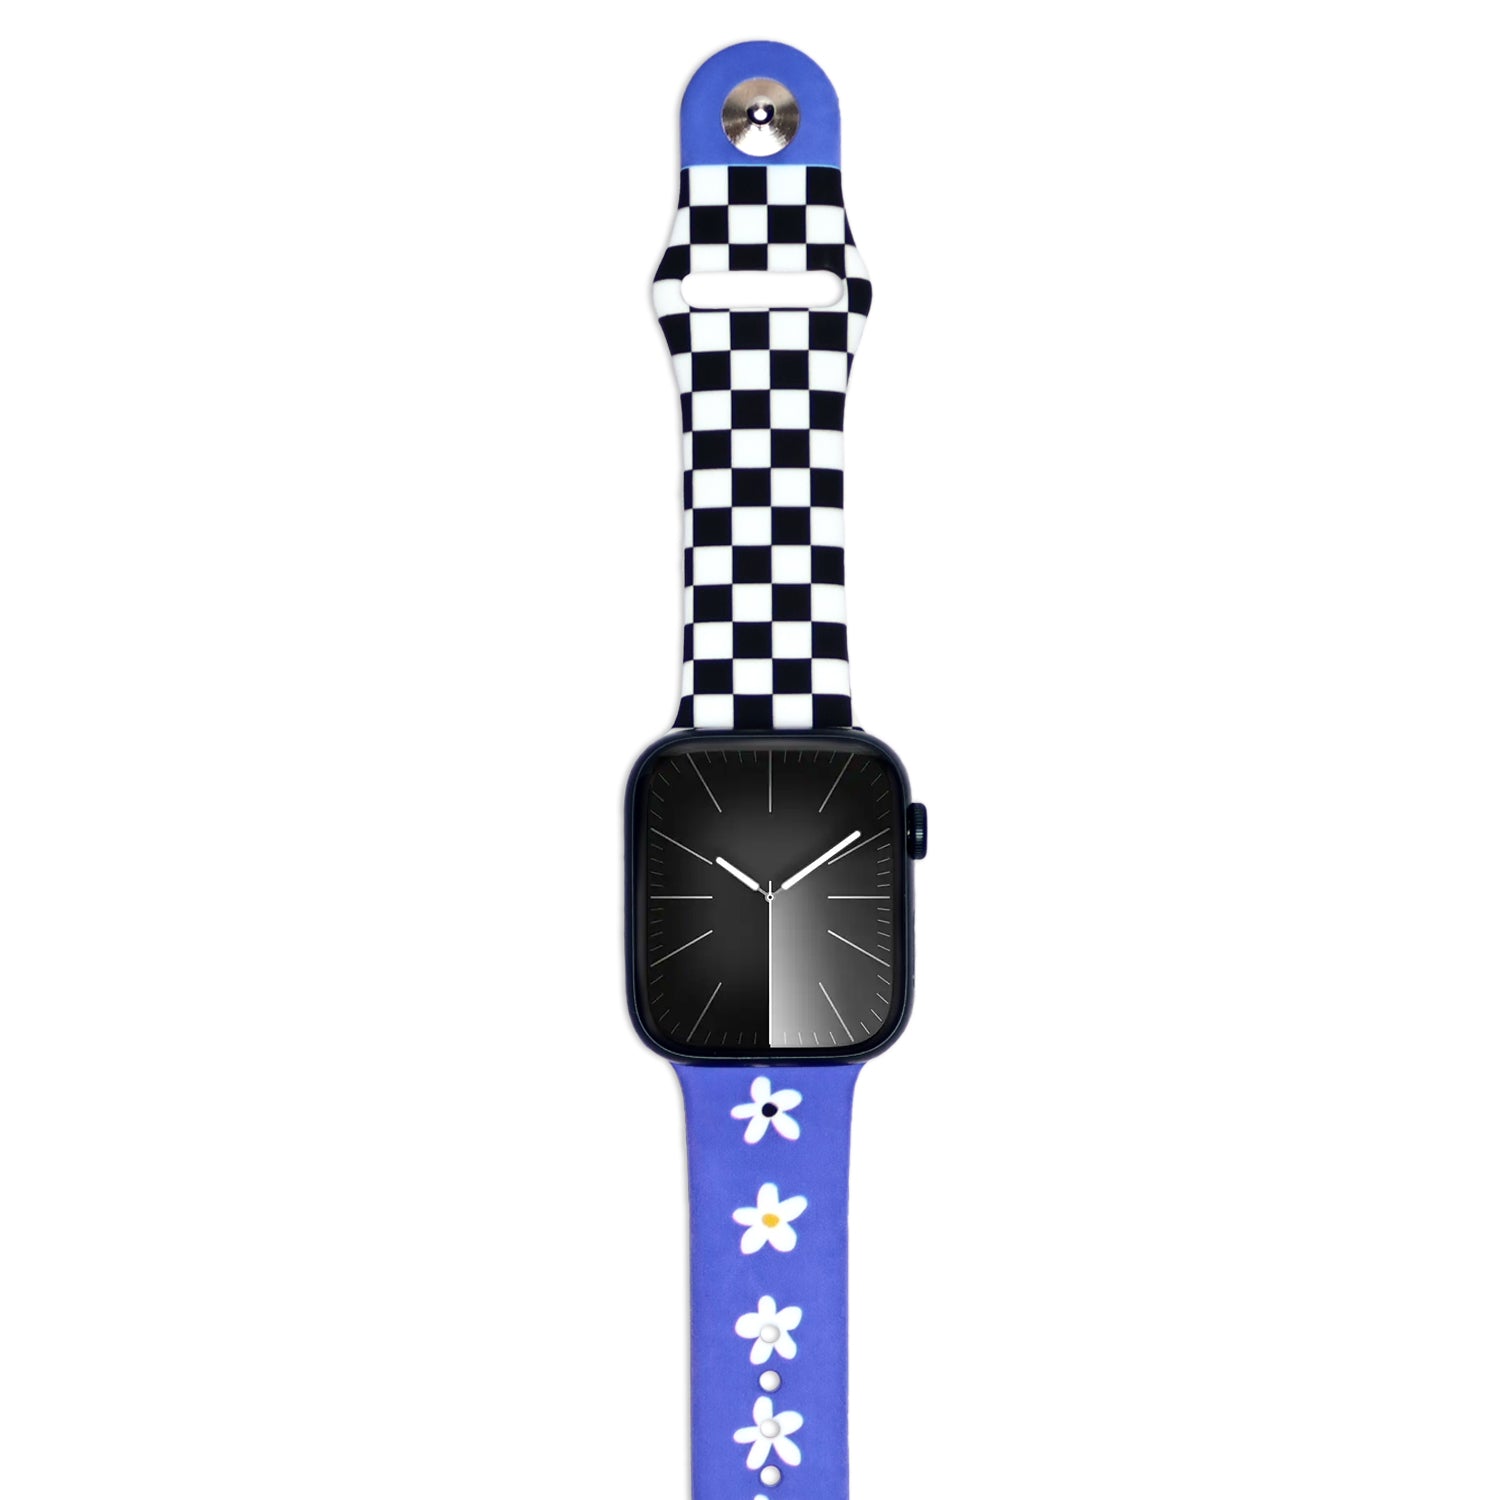 Checks & Flowers Apple Watch Band - Projects Watches